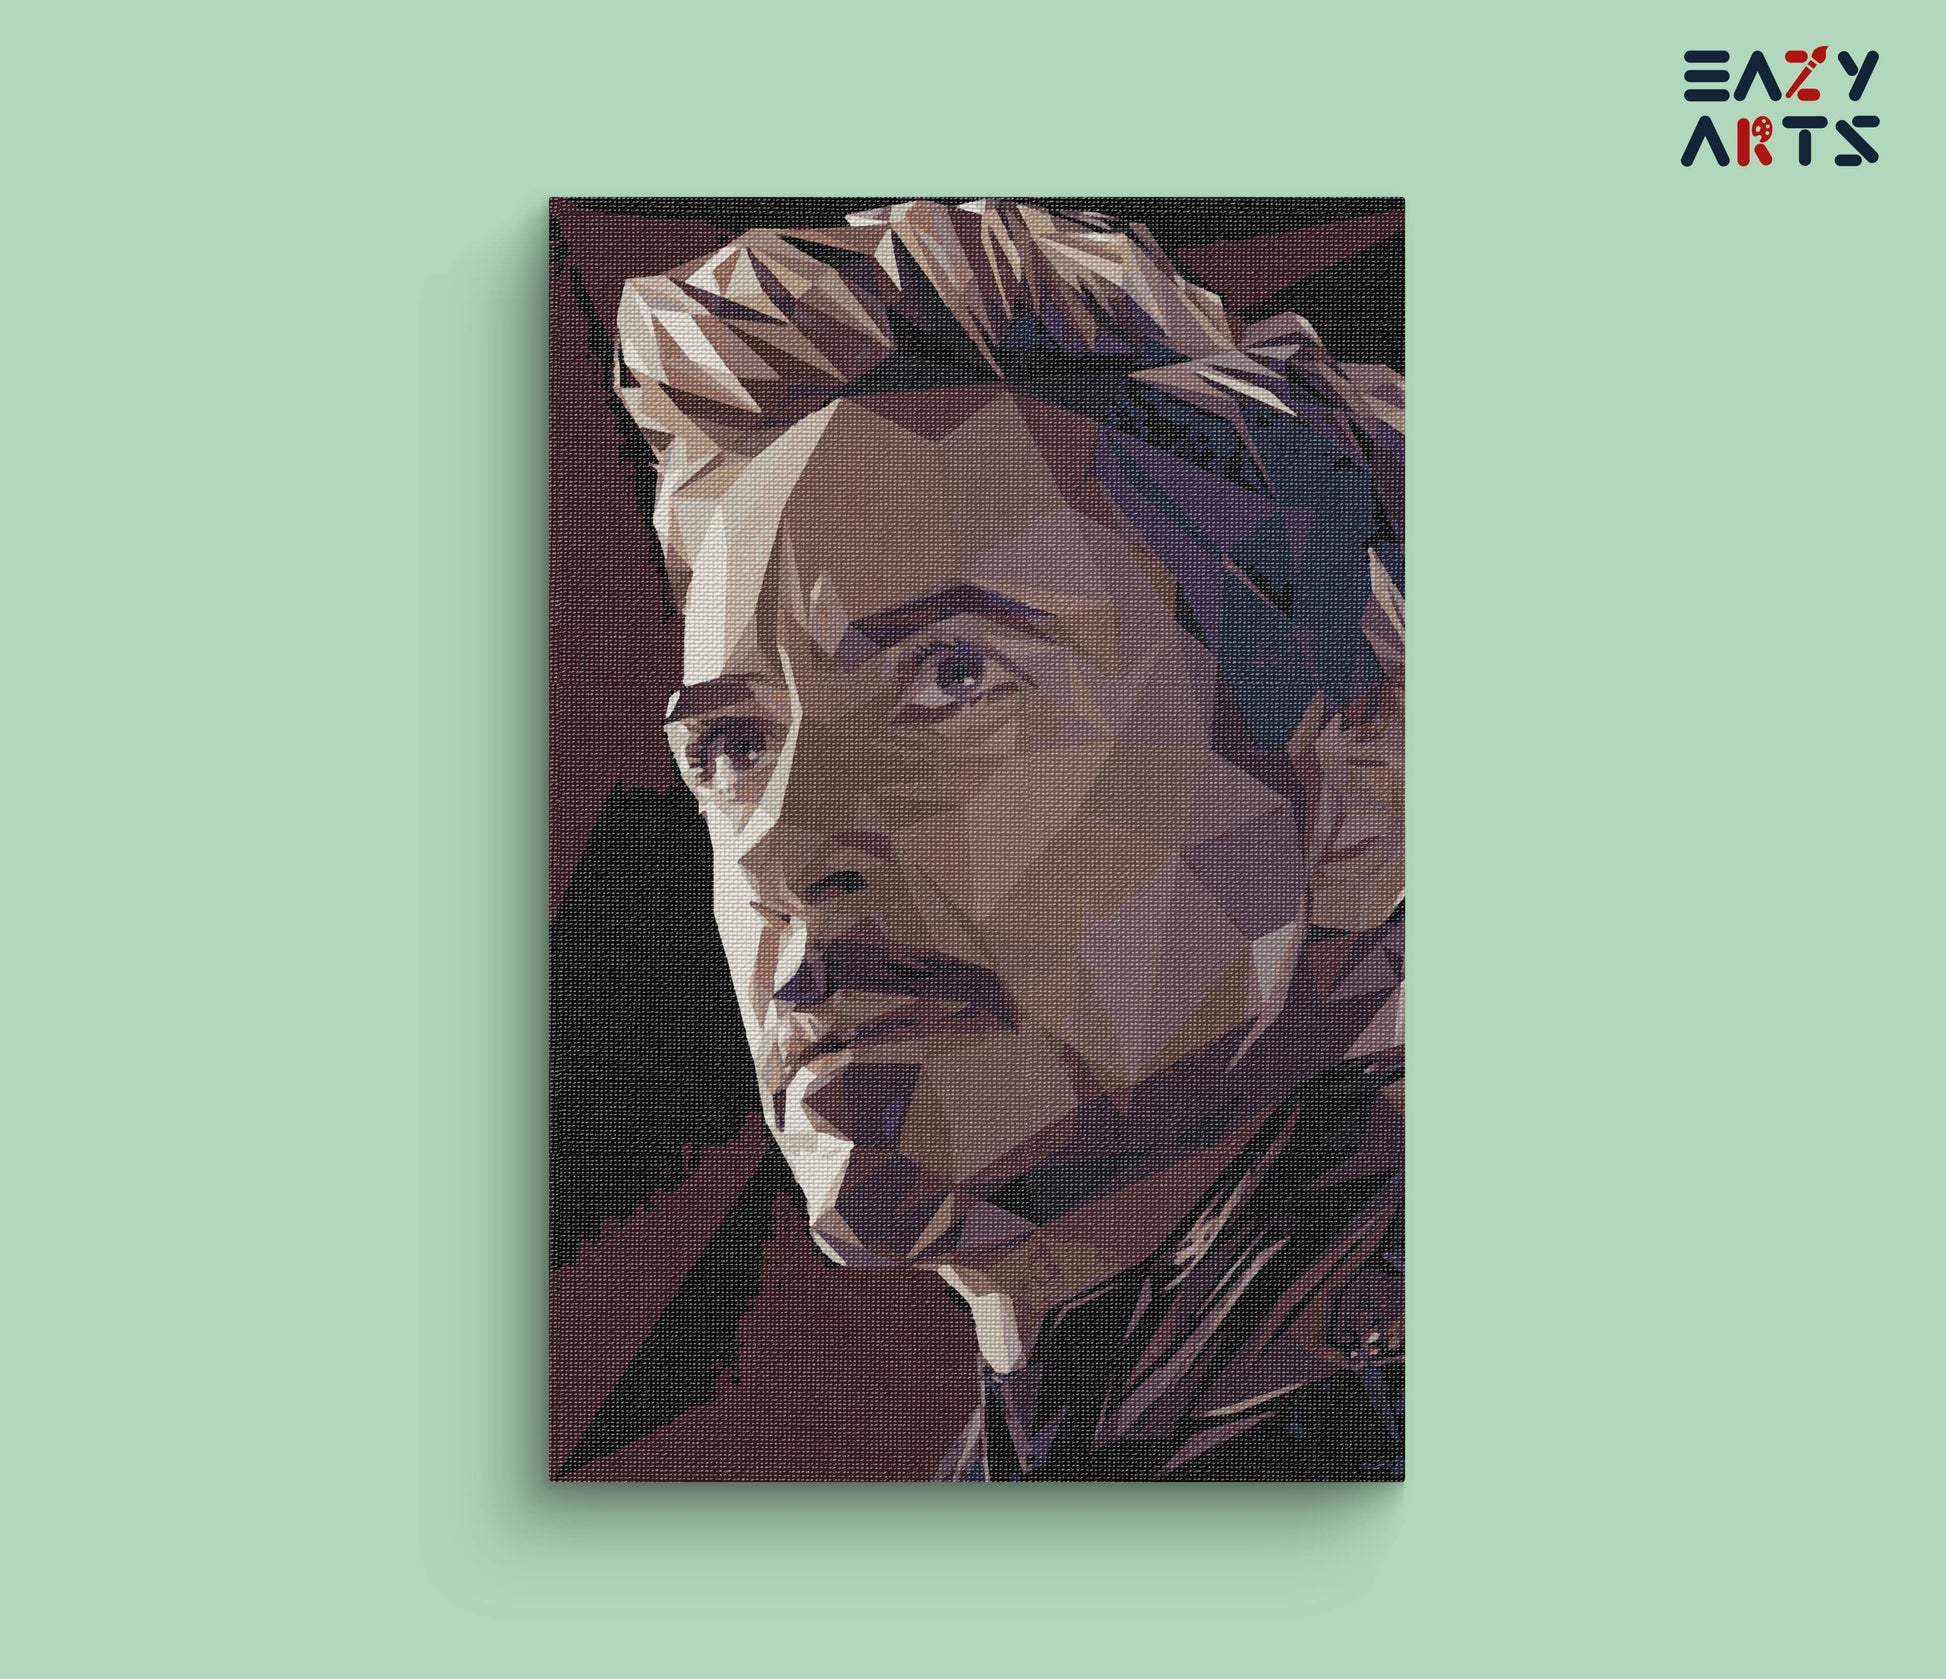 Tony Stark paint by numbers